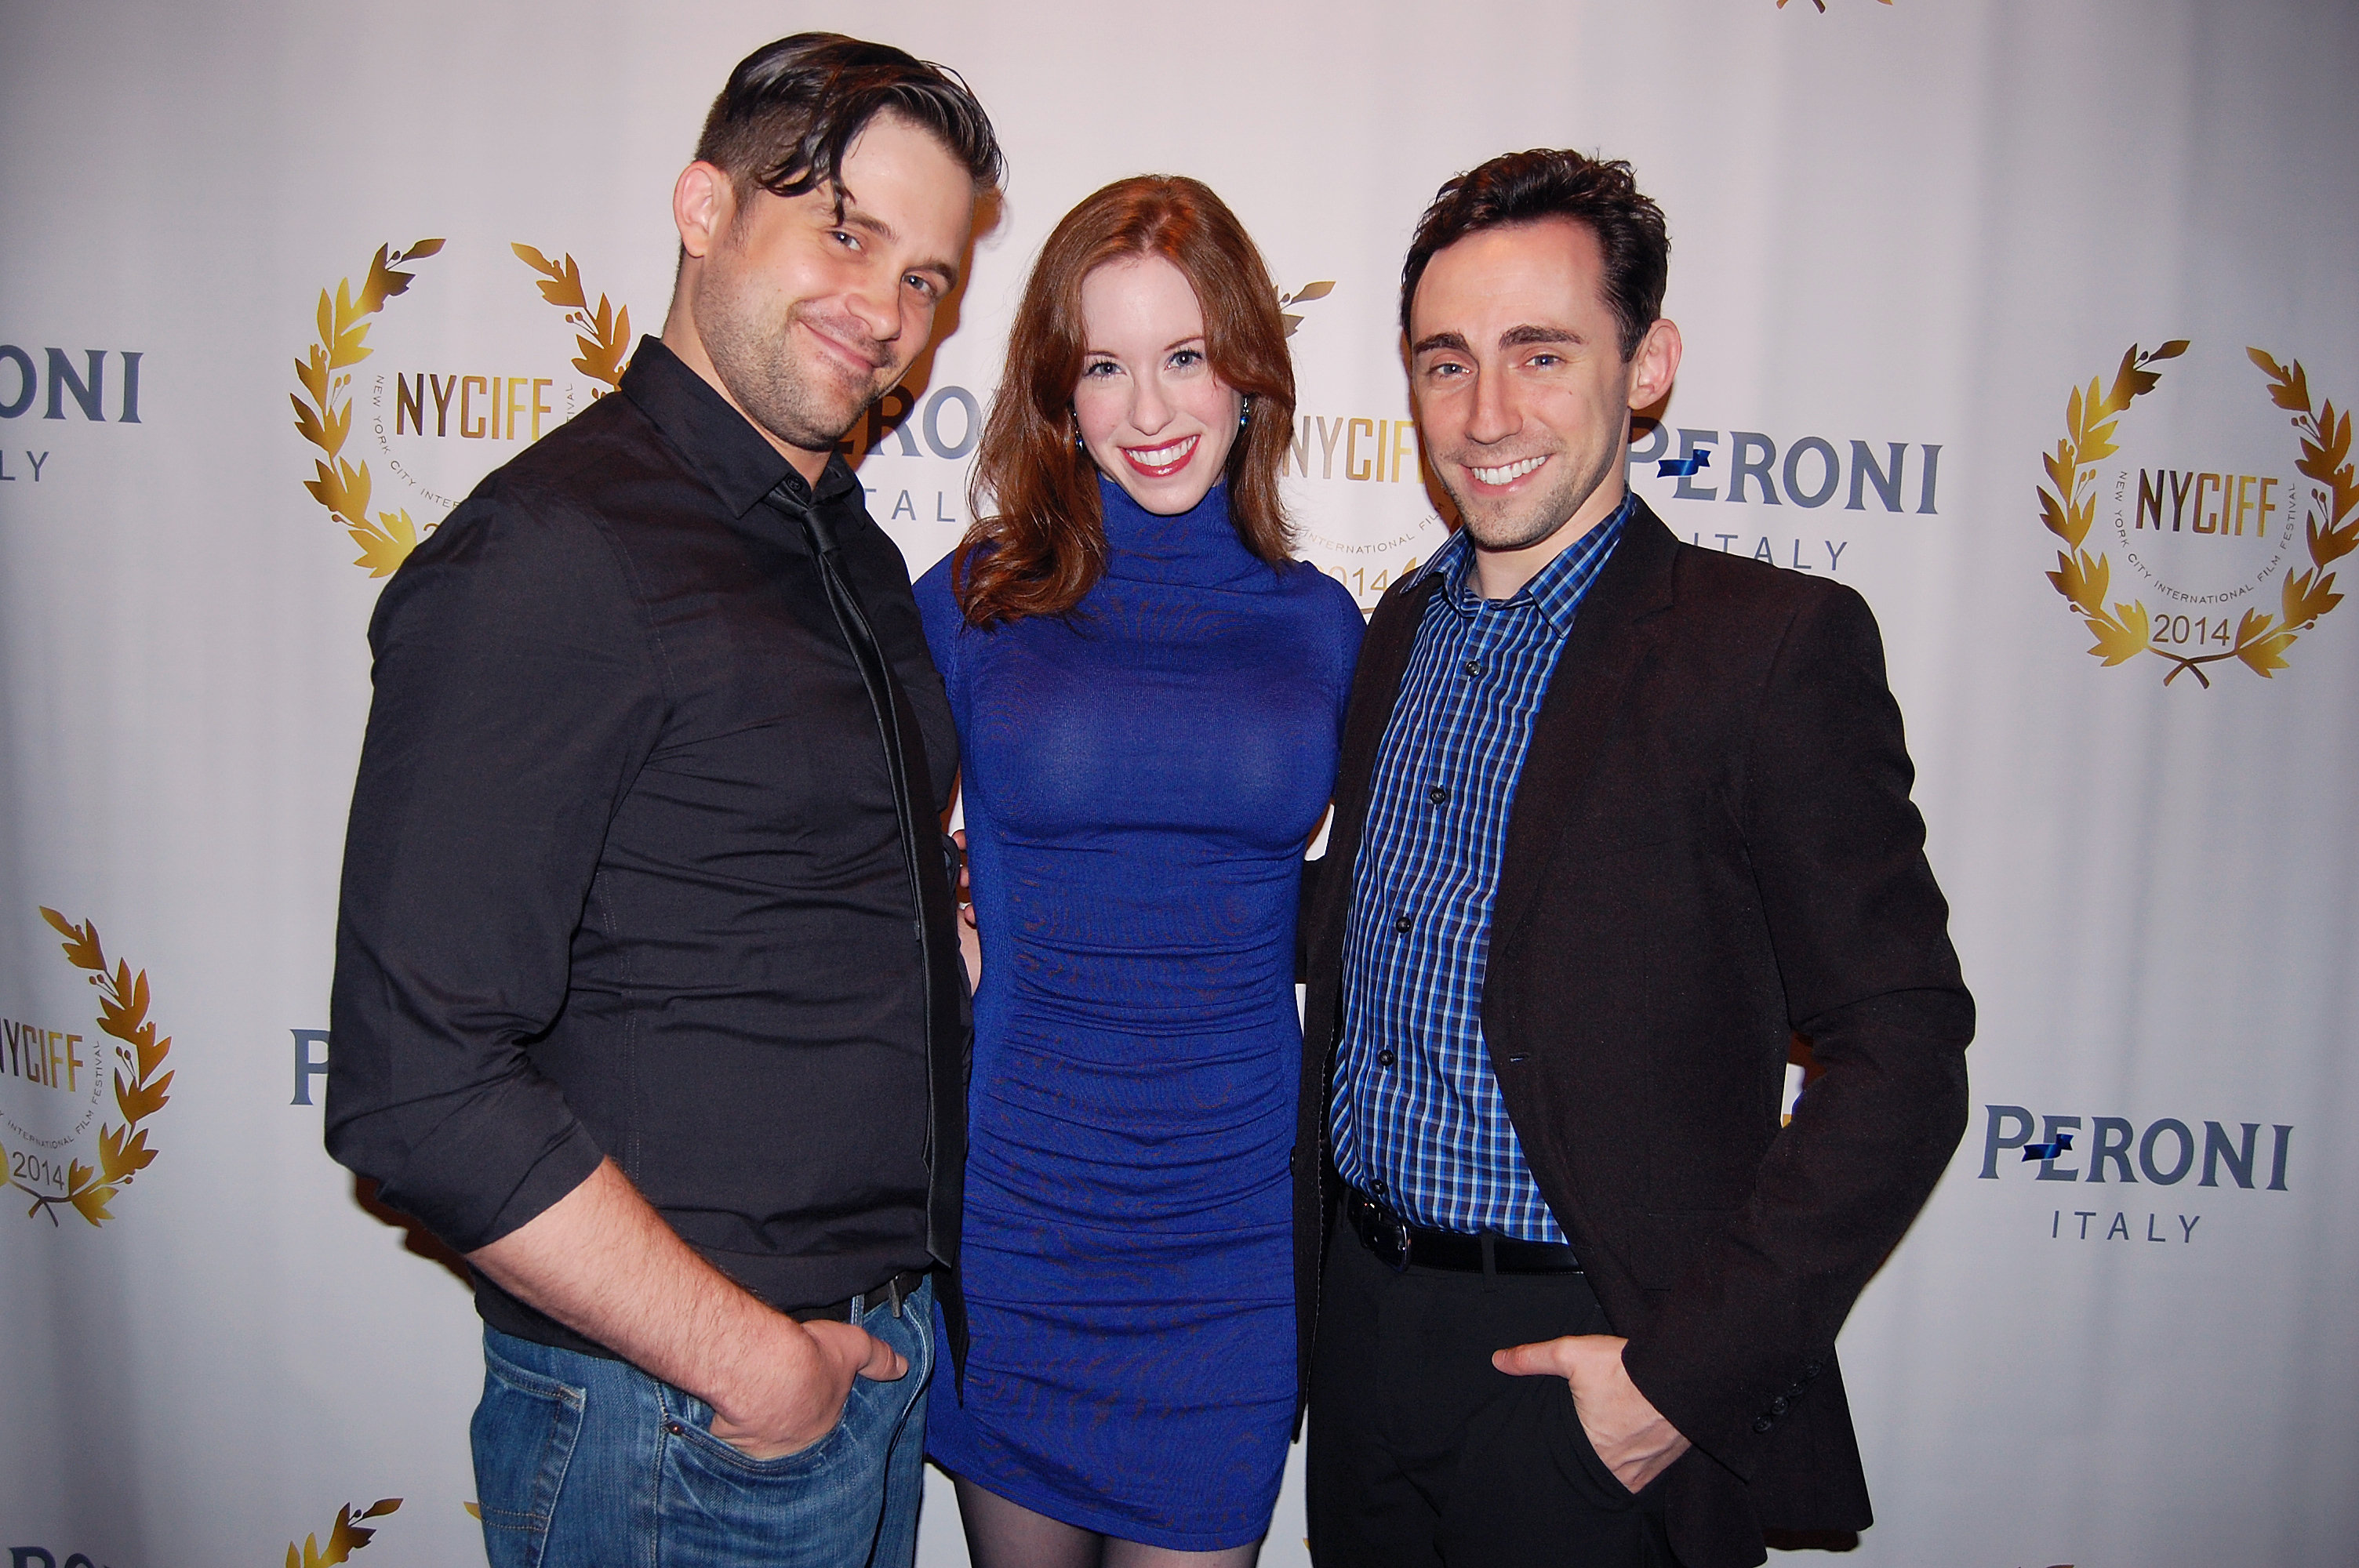 THE GRID's three leads at the 2014 NYC International Film Festival's Red Carpet Opening Night.